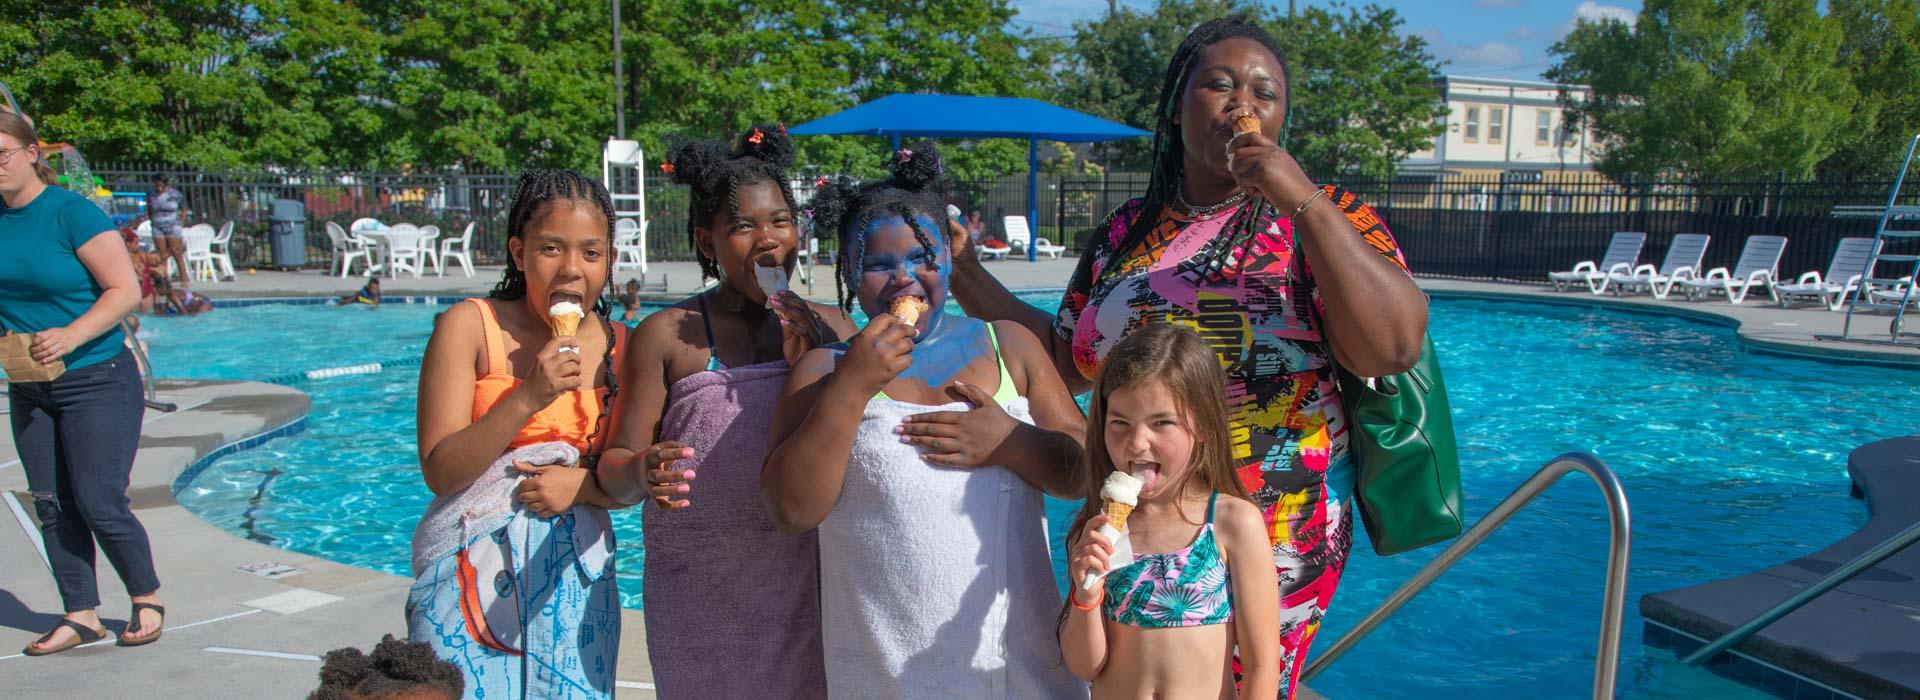 Swimmers stand in front of the pool enjoying ice cream cones